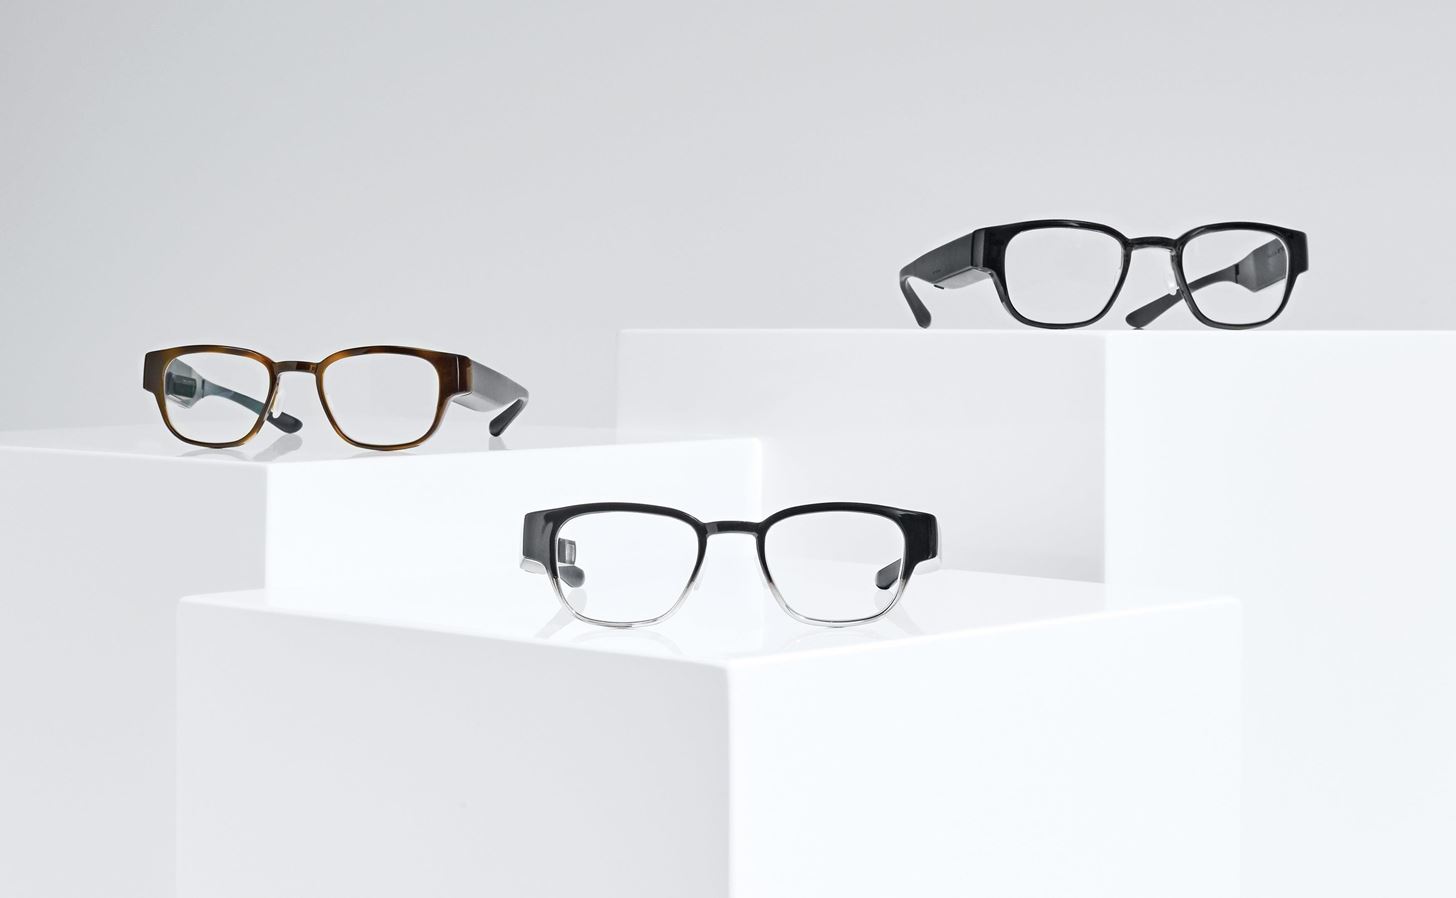 Smartglasses Startup North Begins Delivering First Focals Shipments, Announces Series of New Pop-Up Stores